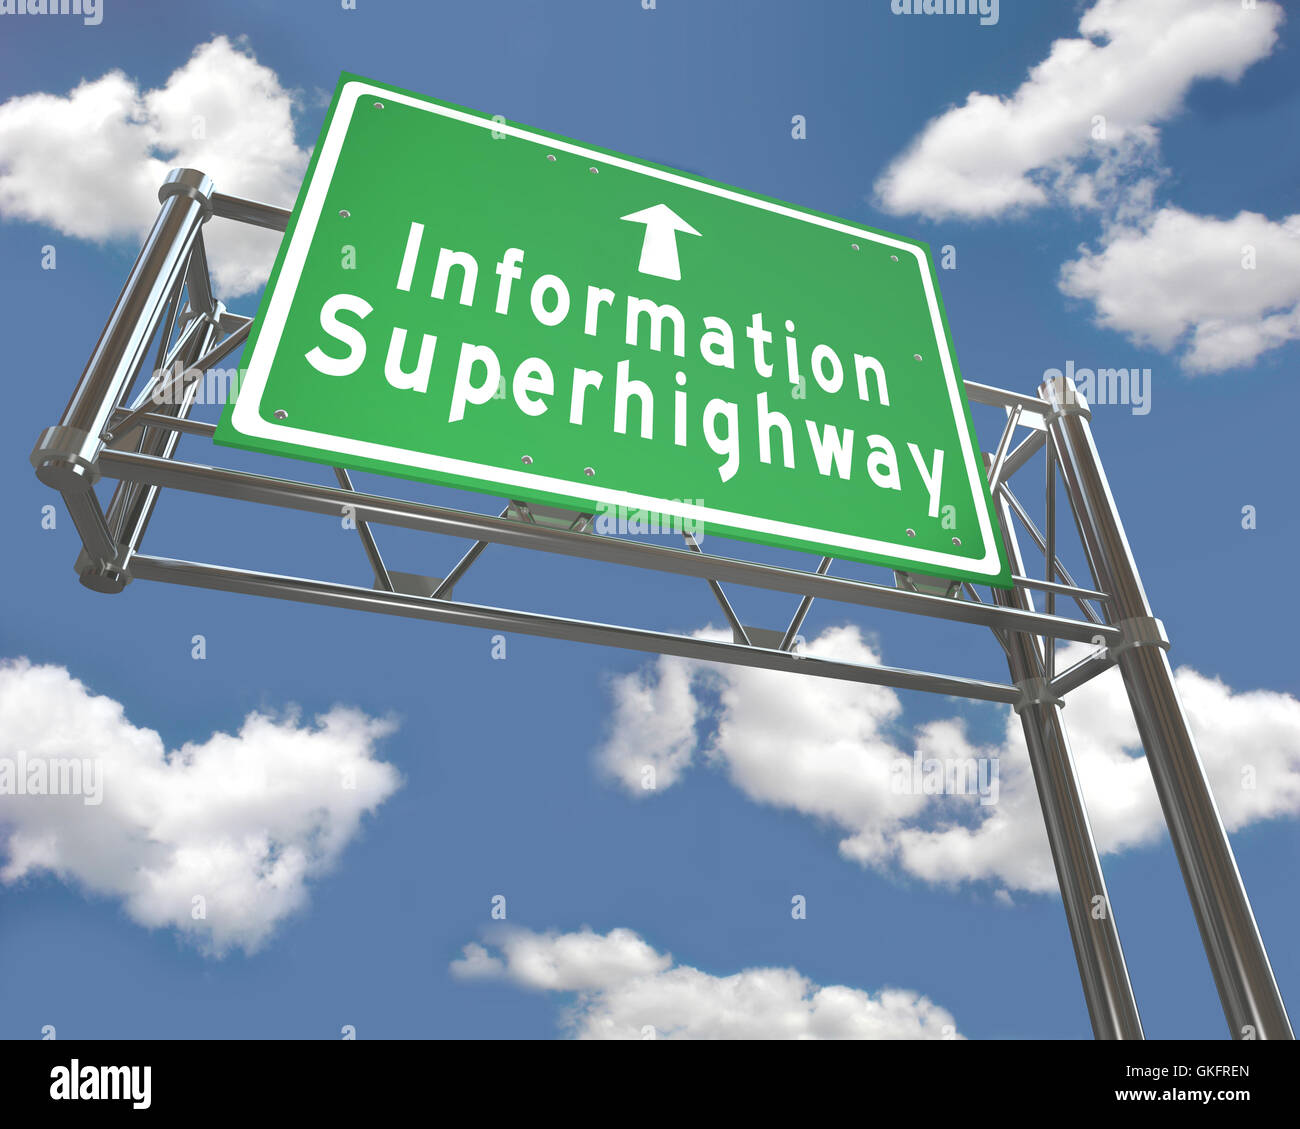 Freeway Sign - Information Superhighway Stock Photo